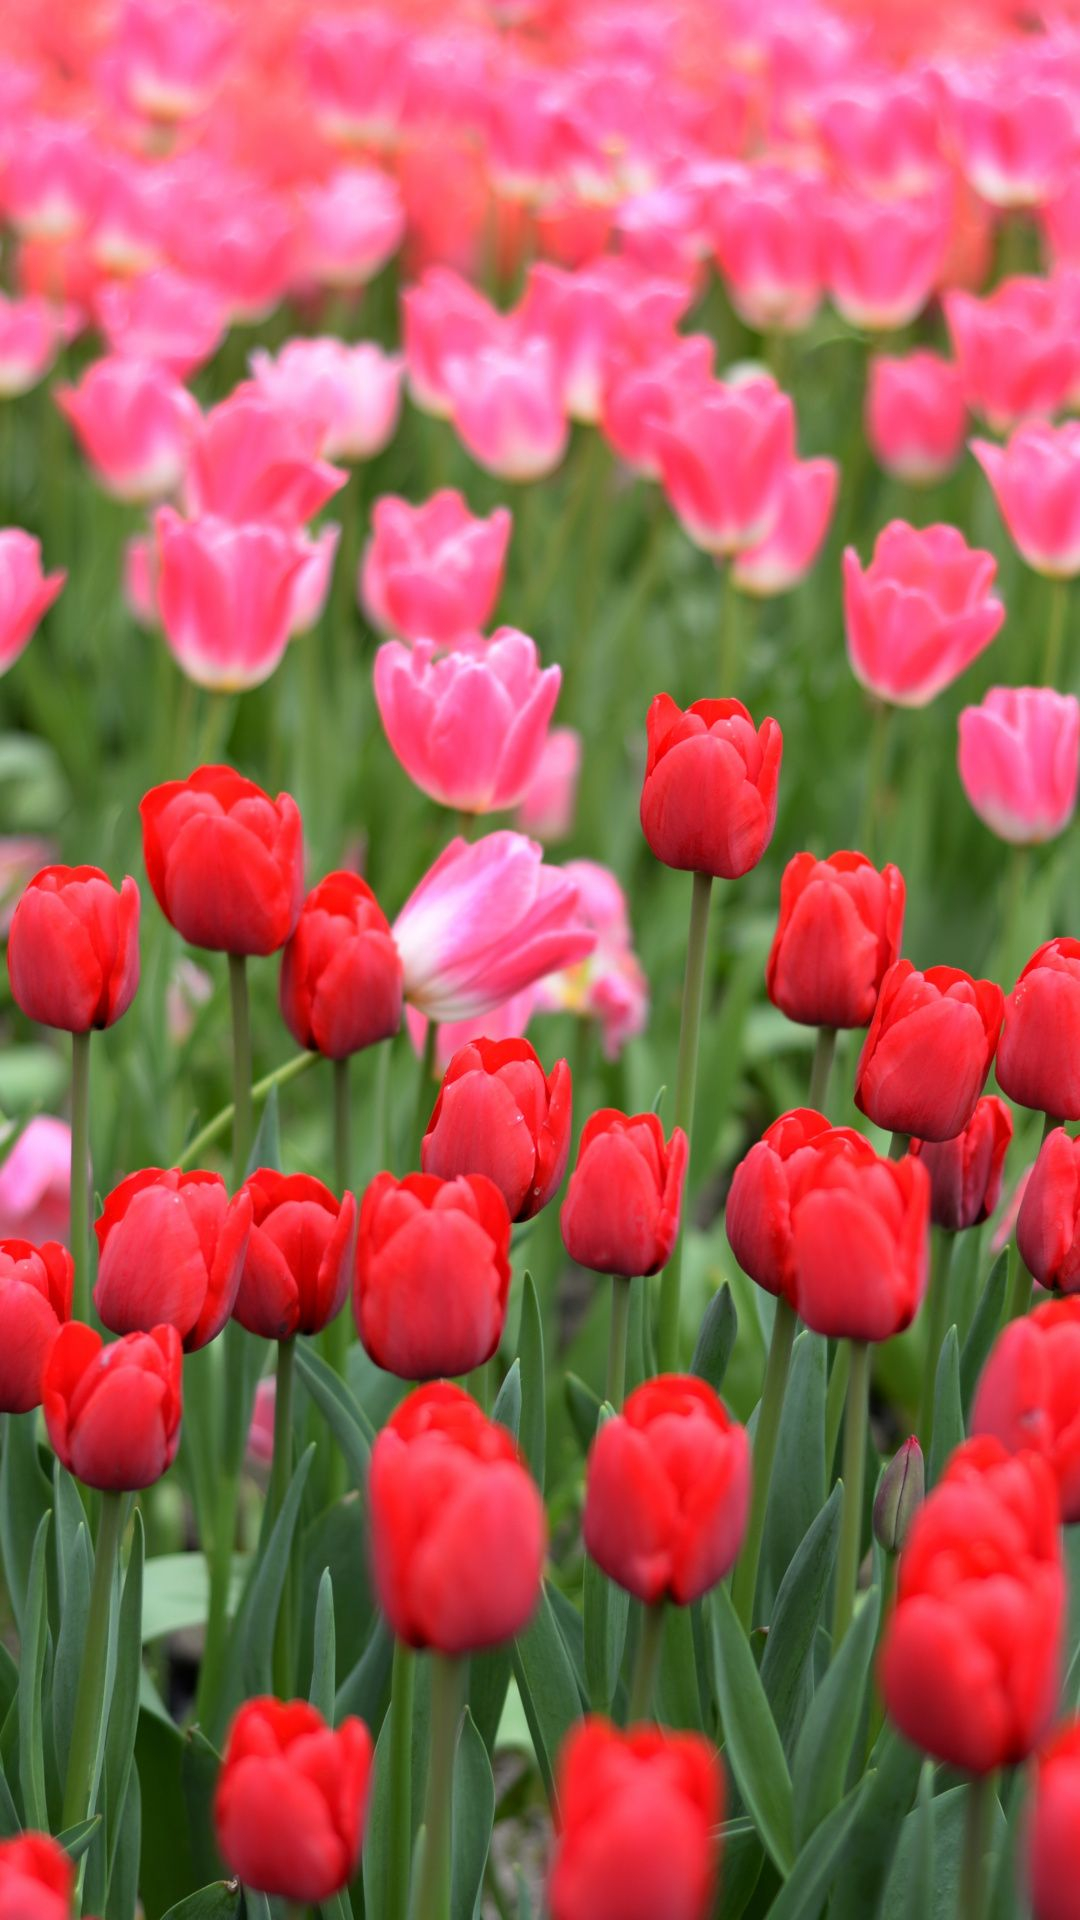 1080x1920 Pink and red tulips, farm Wallpaper | Red tulips, Hd flower wallpaper, Tulips